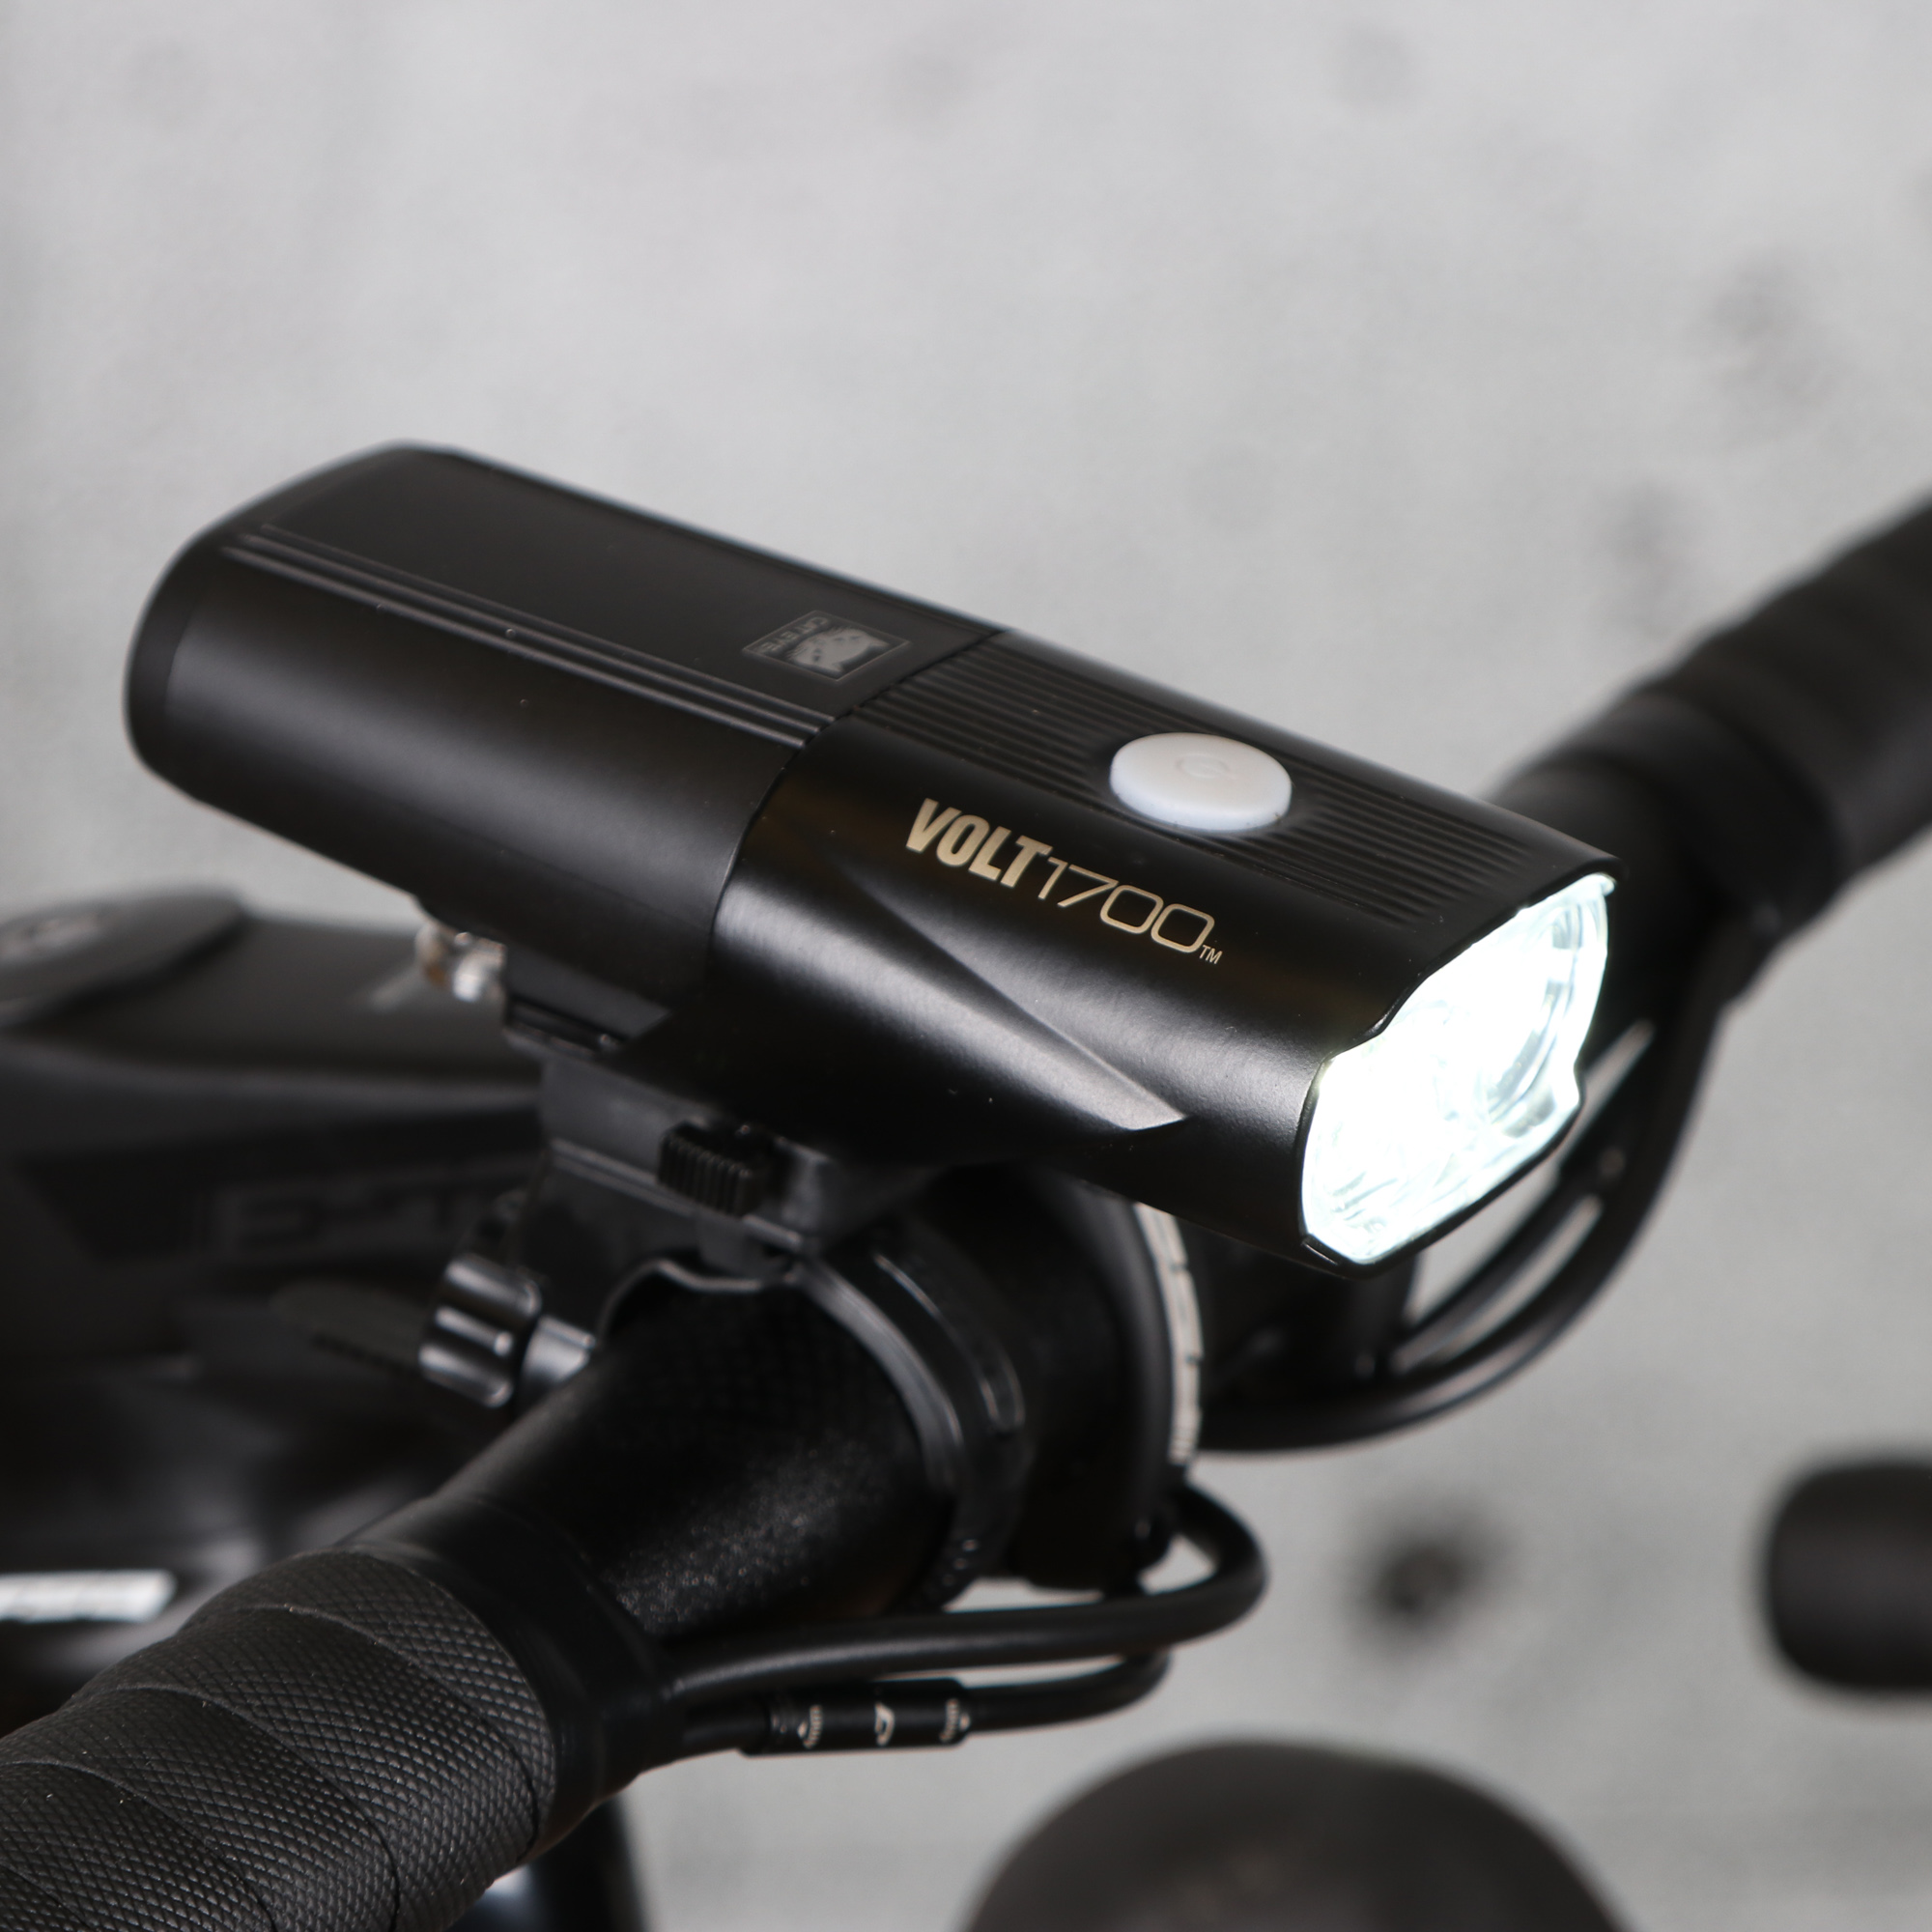 Review: Cateye Volt 1700 USB Rechargeable Front Light | road.cc